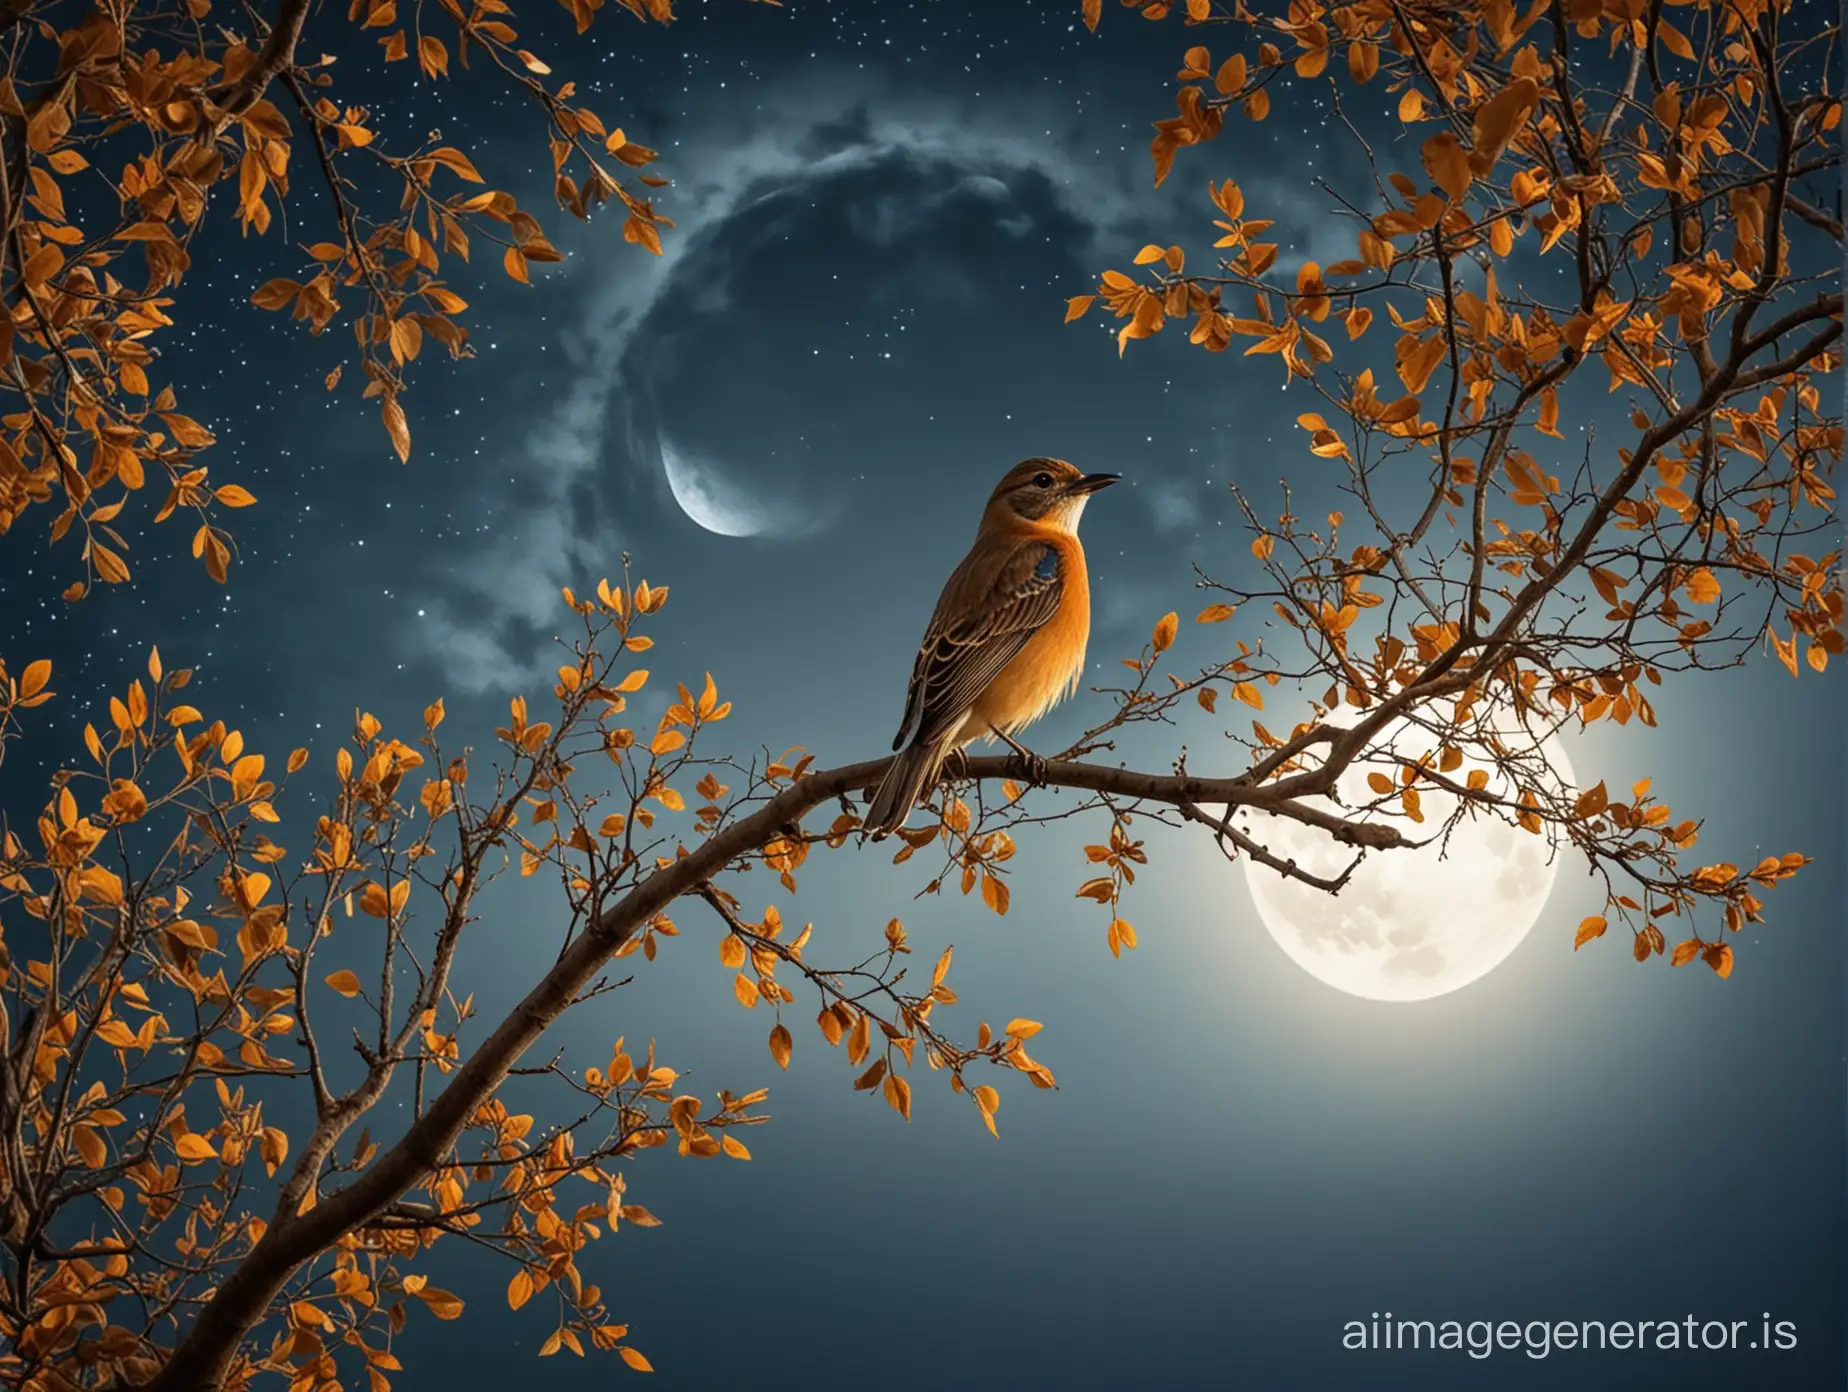 a beautiful bird sitting on full of leaves tree branch before the mesmerizing full moon in the lovely night